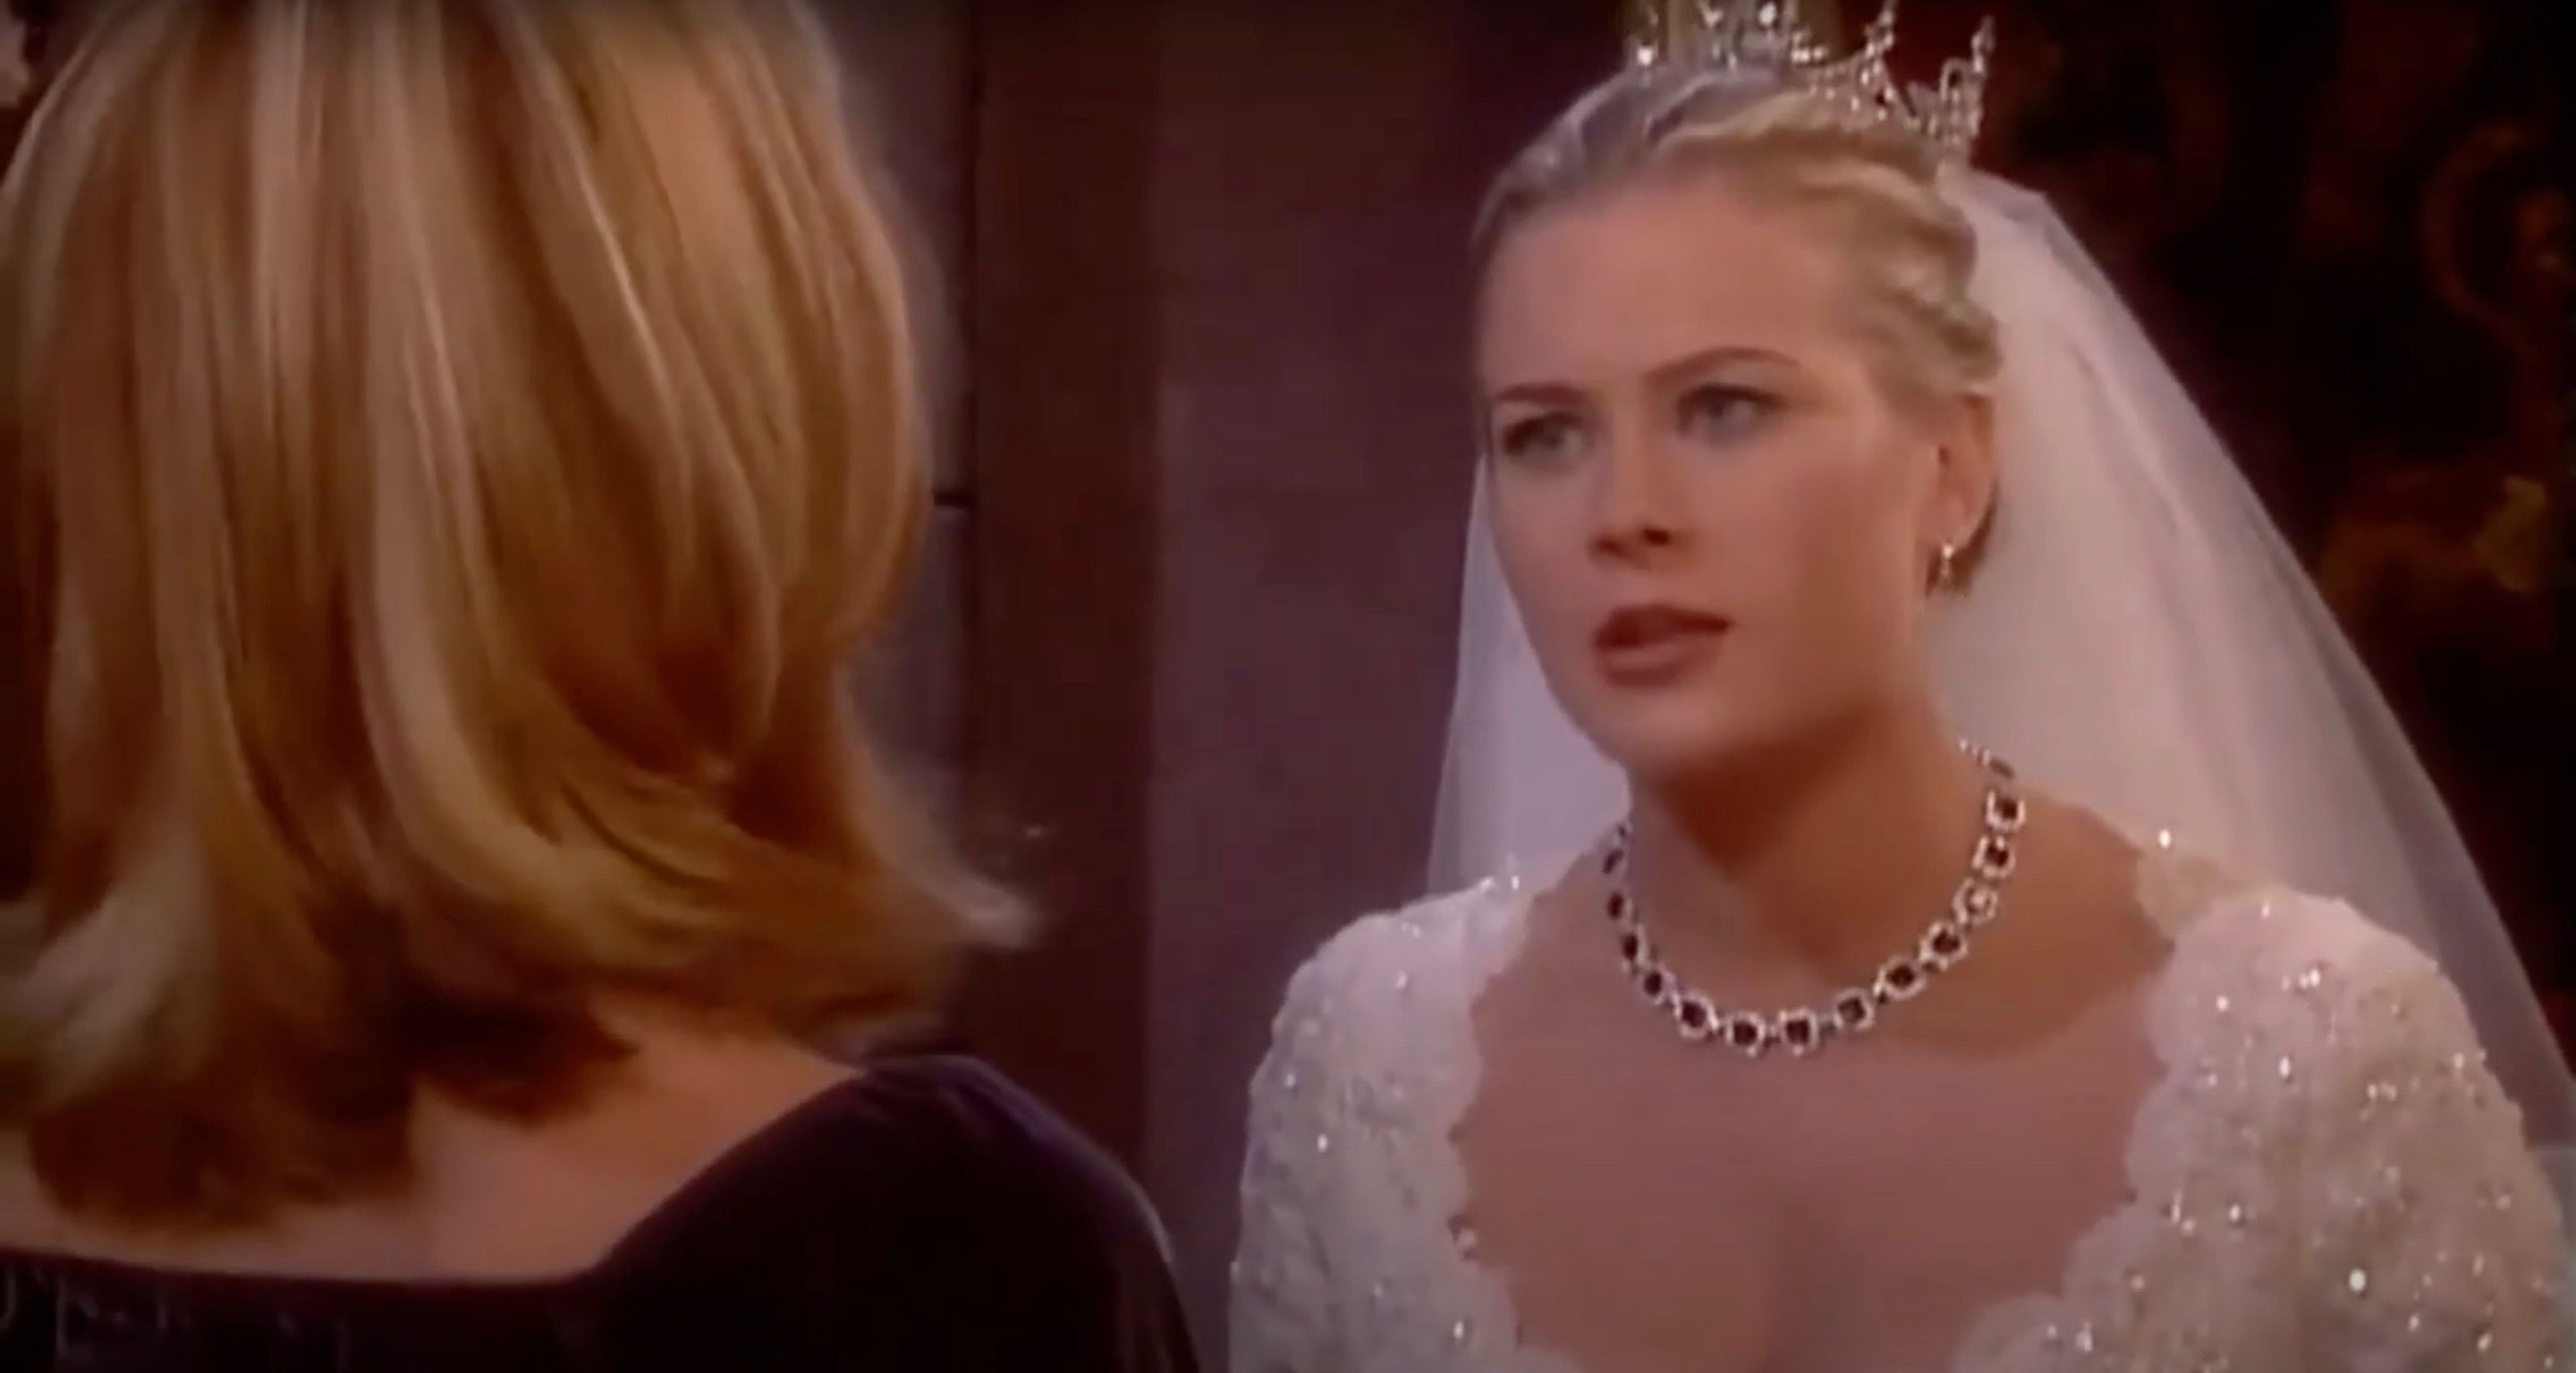 Carrie talking to Sami who looks upset and is wearing a wedding dress in Days Of Our Lives.